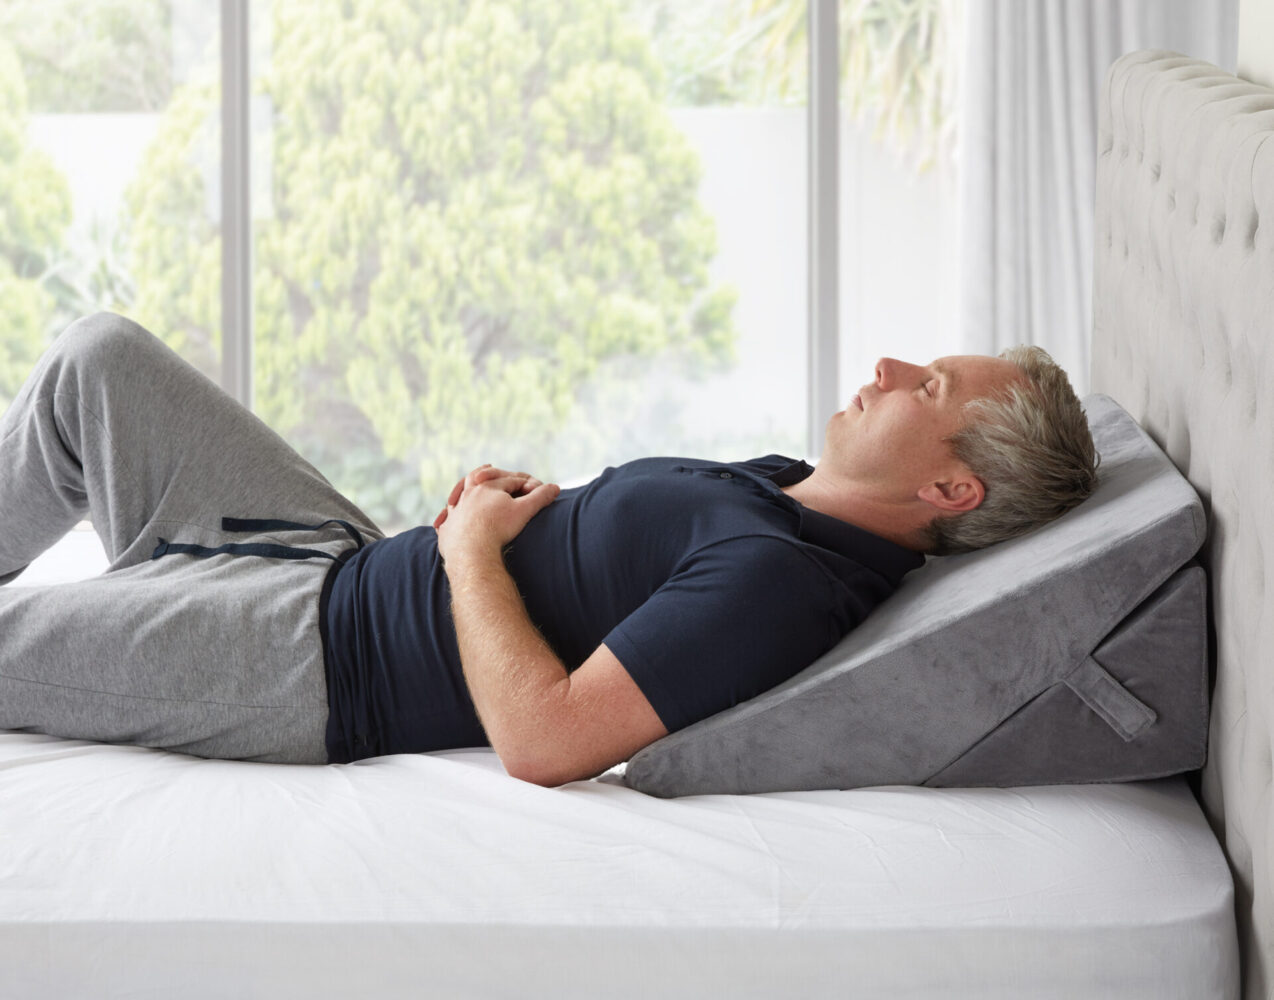 Man sleeping peacefully on the Slumbar wedge Pillow with white bedding and grey tracksuit bottoms